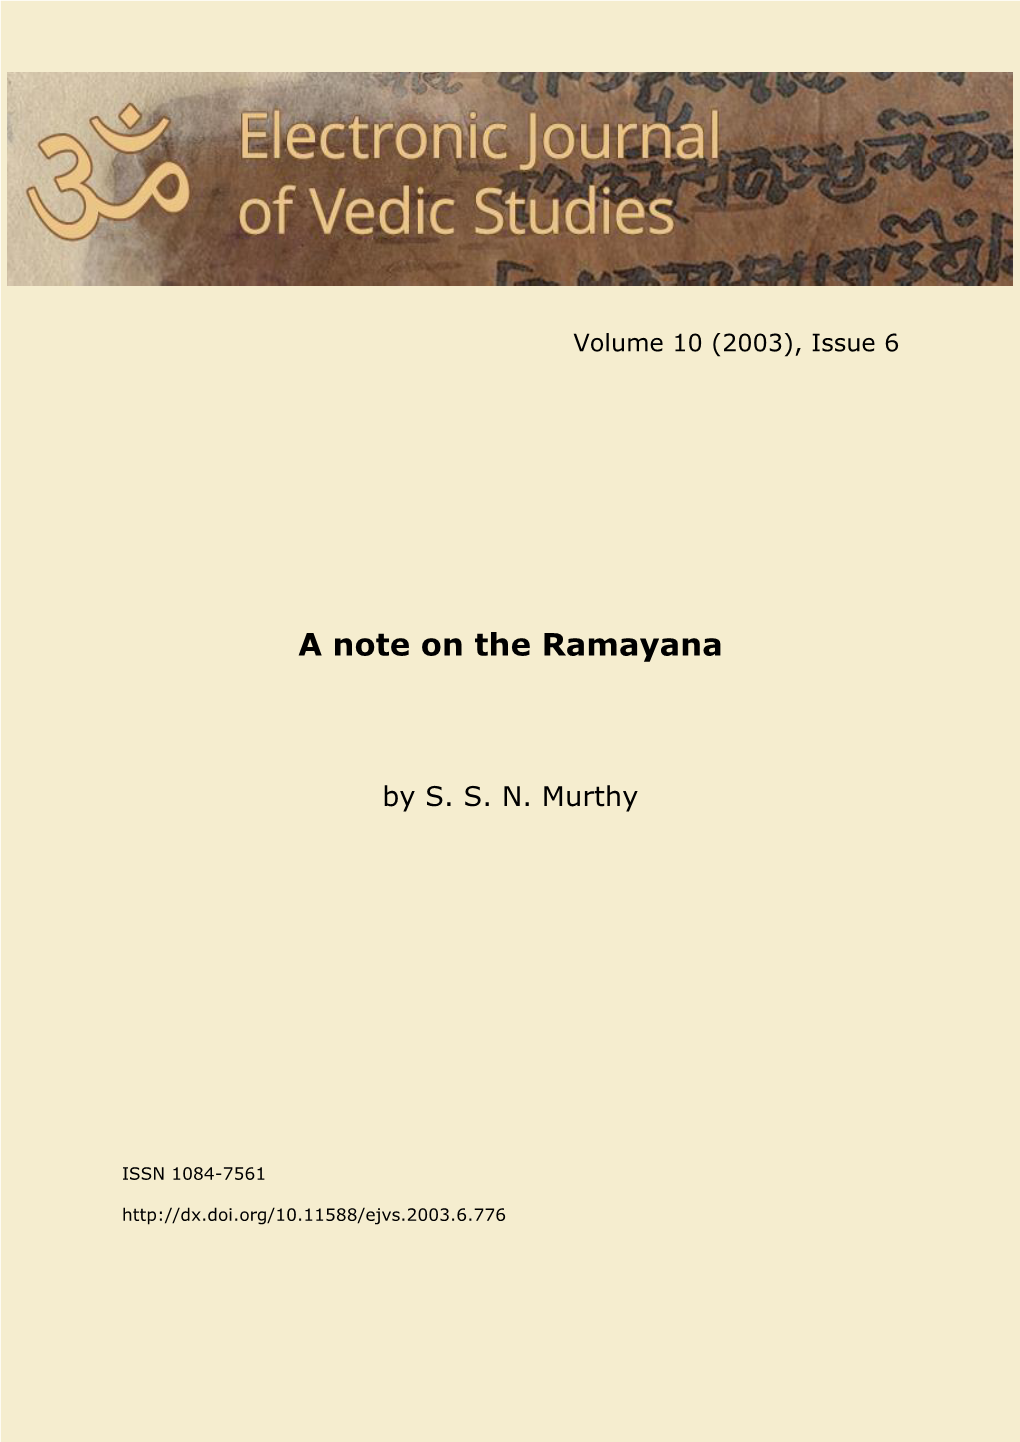 A Note on the Ramayana